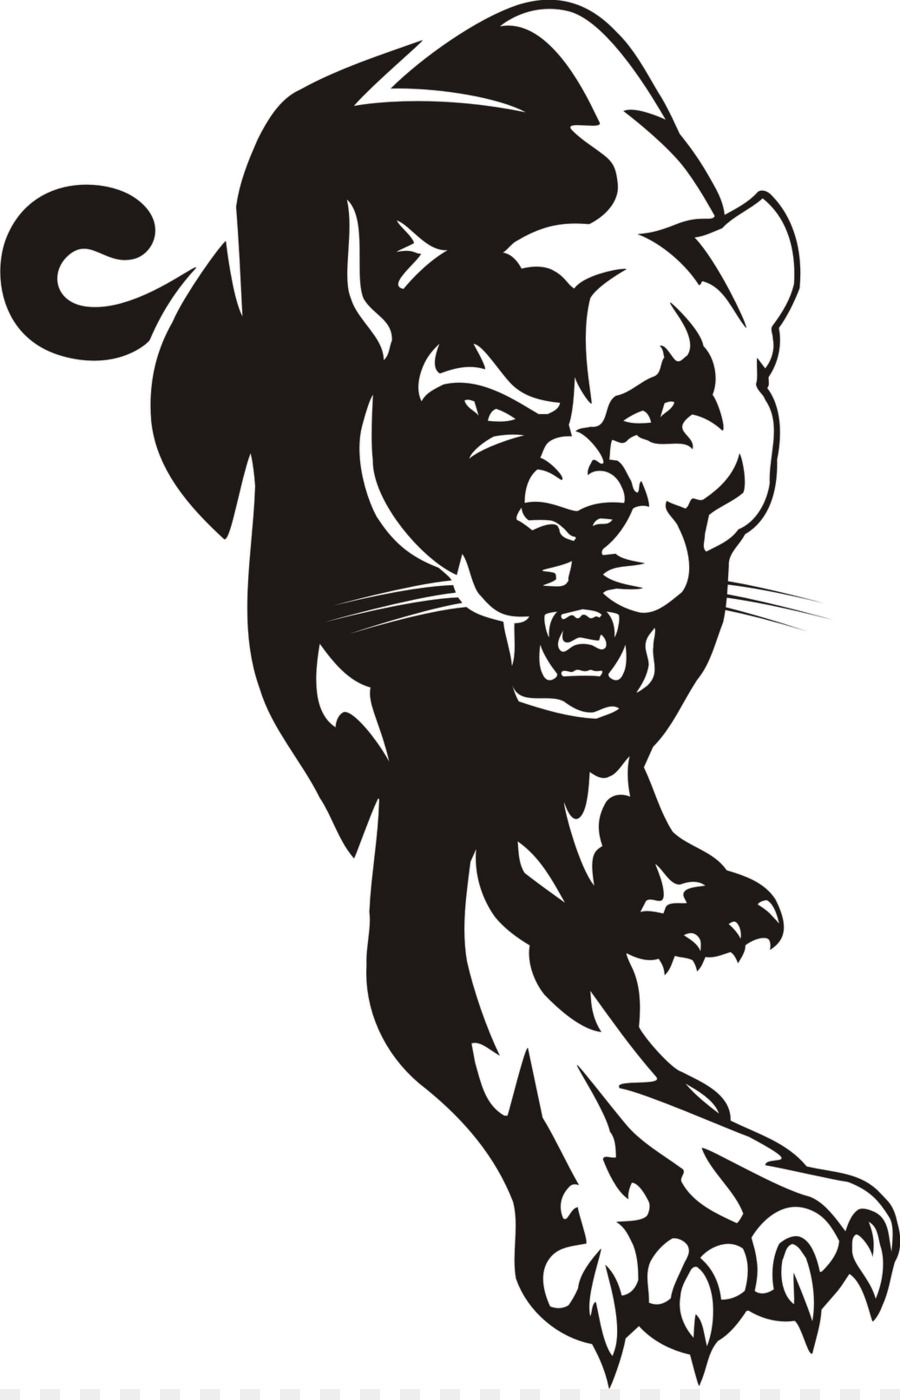 North Lincoln Middle School Student E A Cox Middle School Cougar High school - Panther Head Cliparts png download - 1037*1600 - Free Transparent Student png Download.